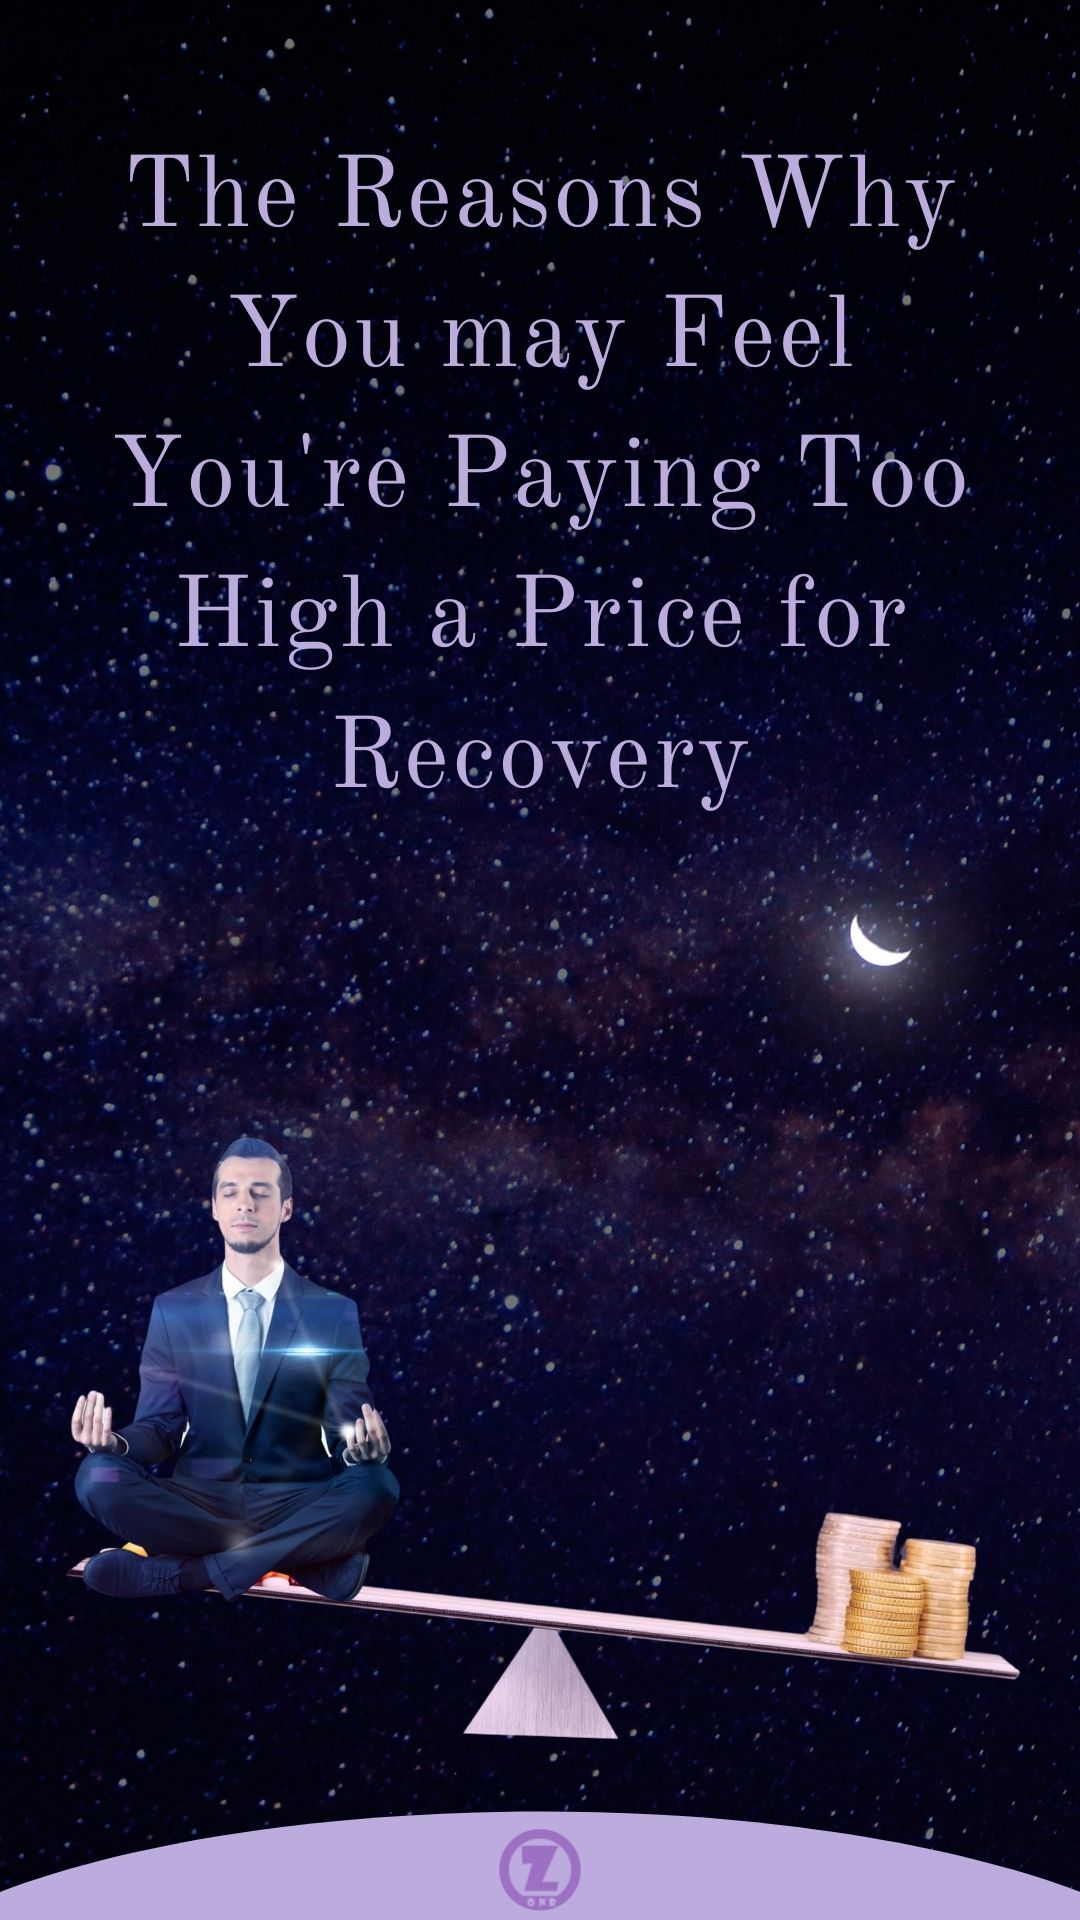 The Reasons Why You may Feel You’re Paying Too High a Price for Recovery – Step 1